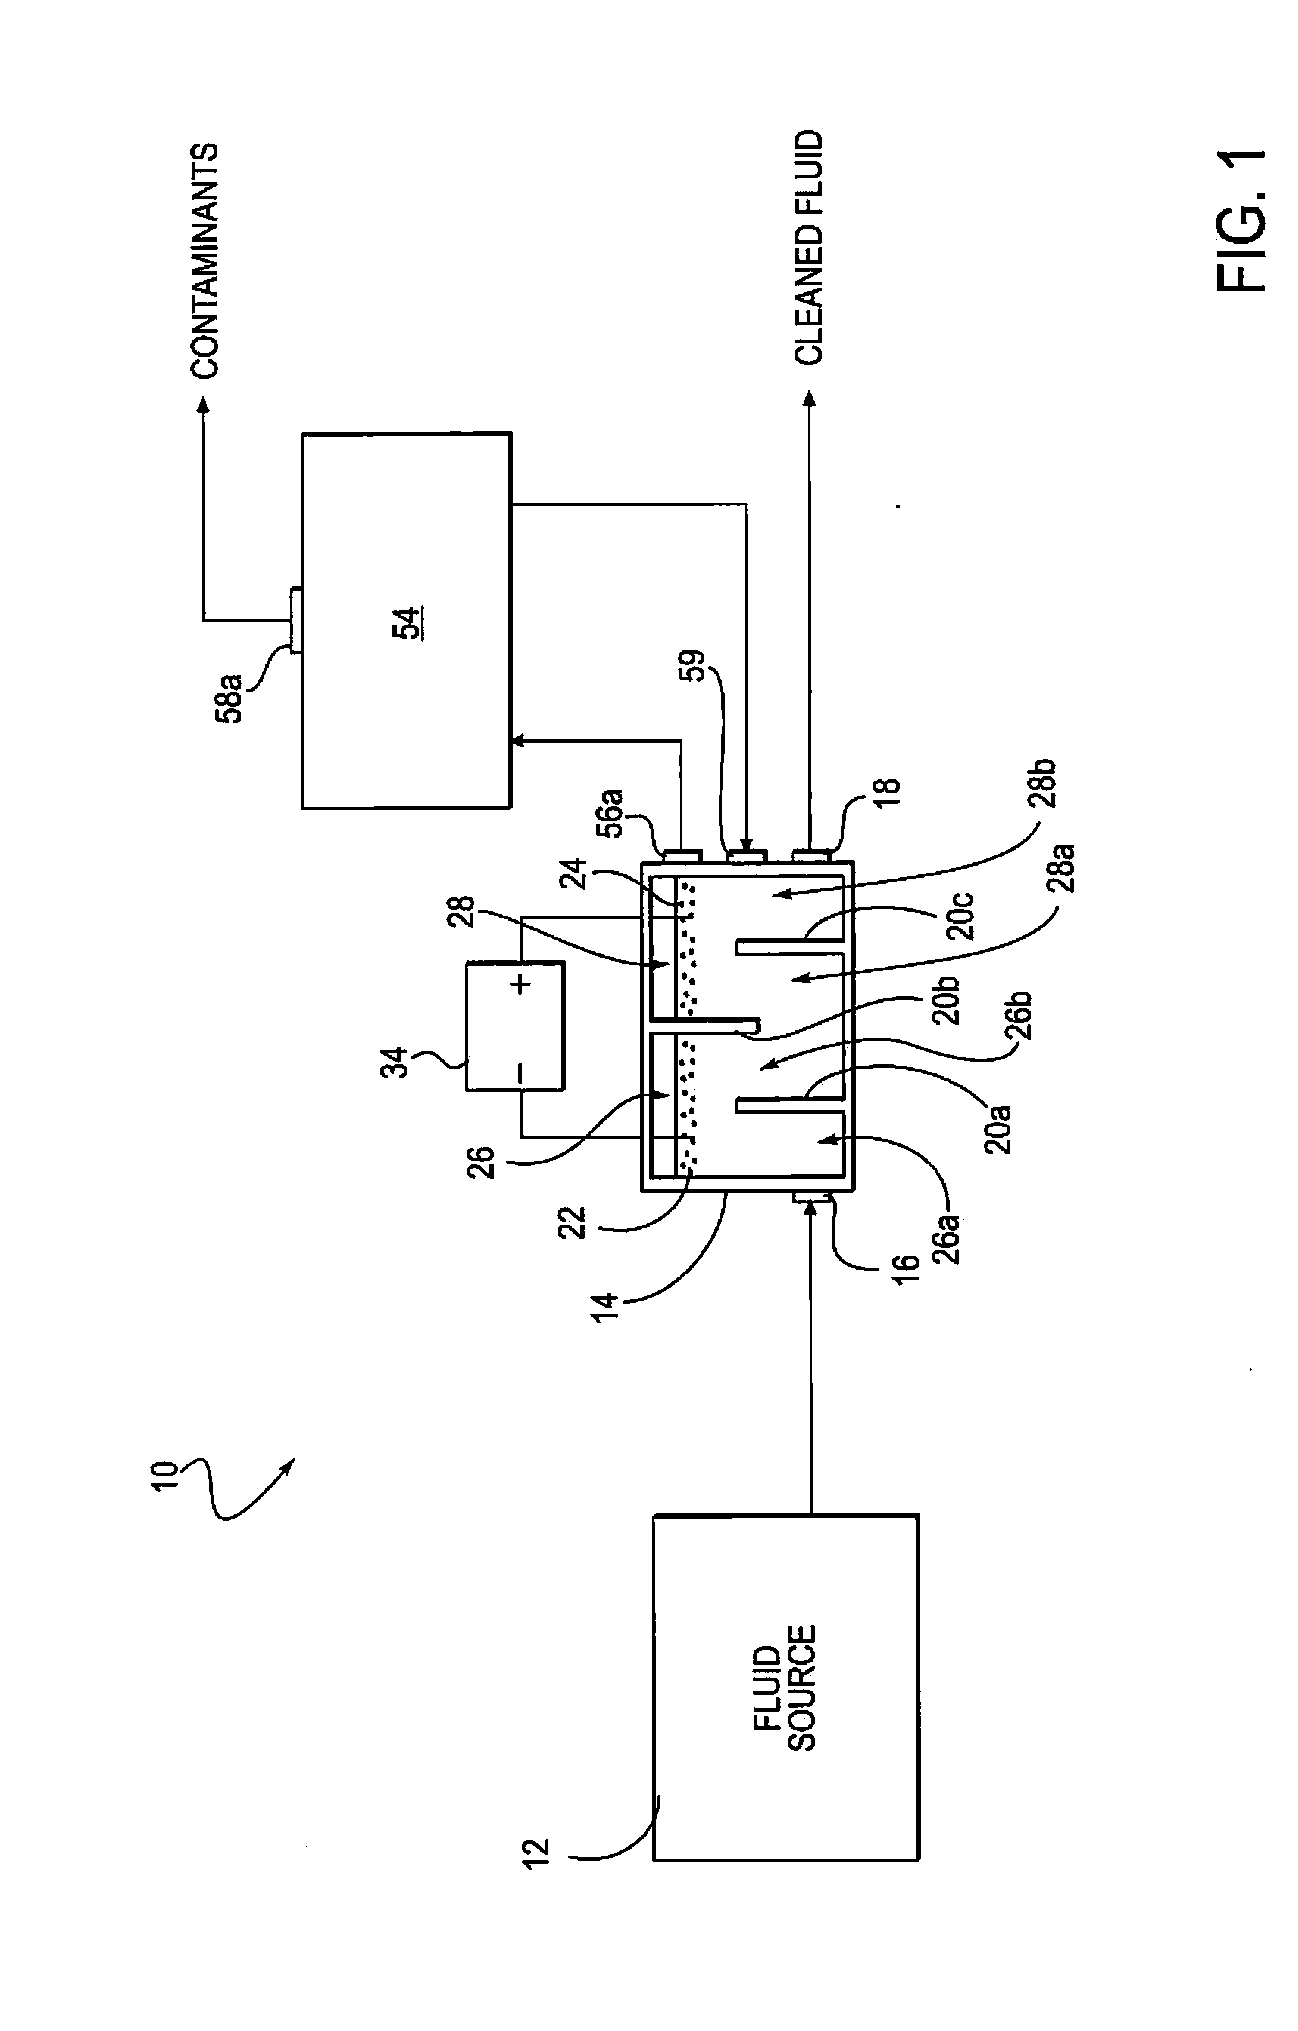 Method and system for removing contaminants from a fluid